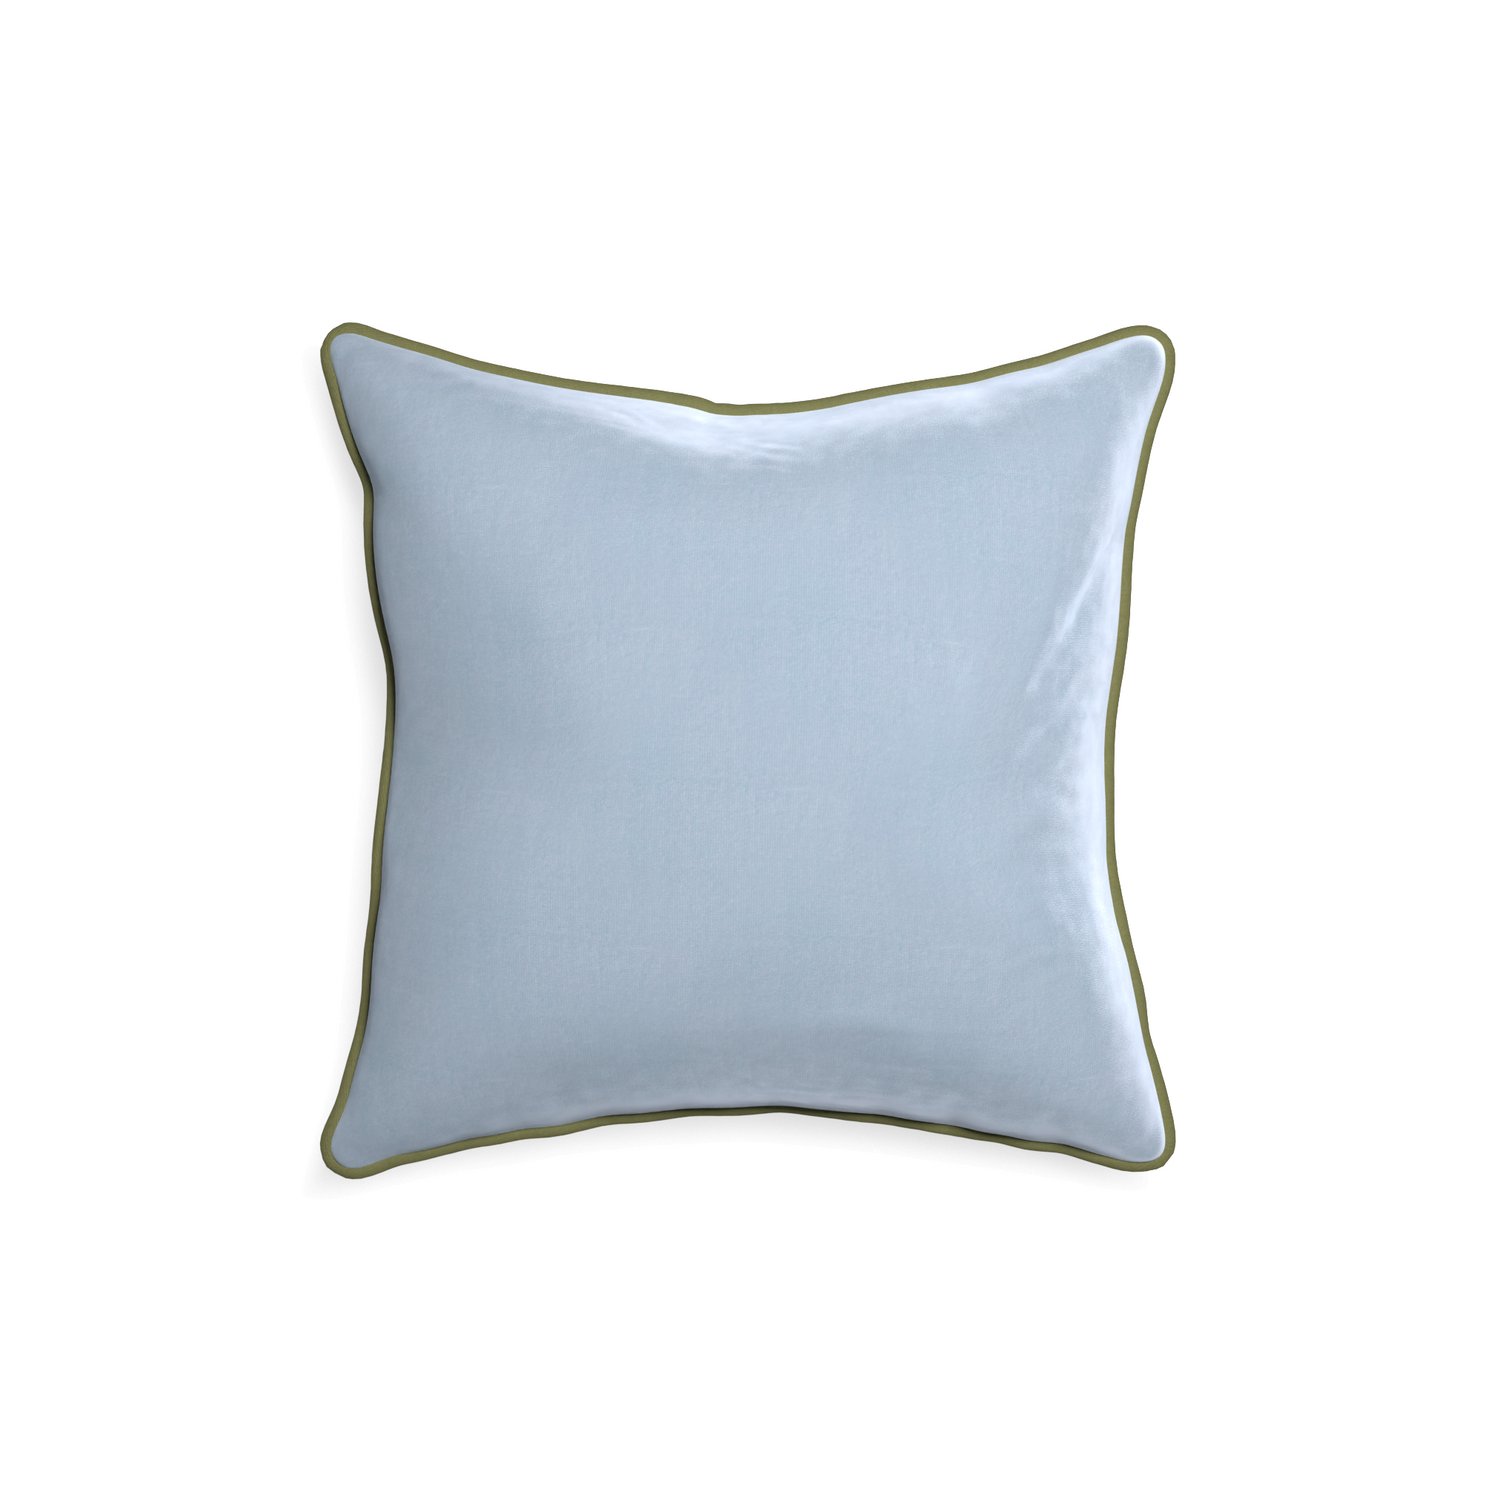 square light blue velvet pillow with moss green piping